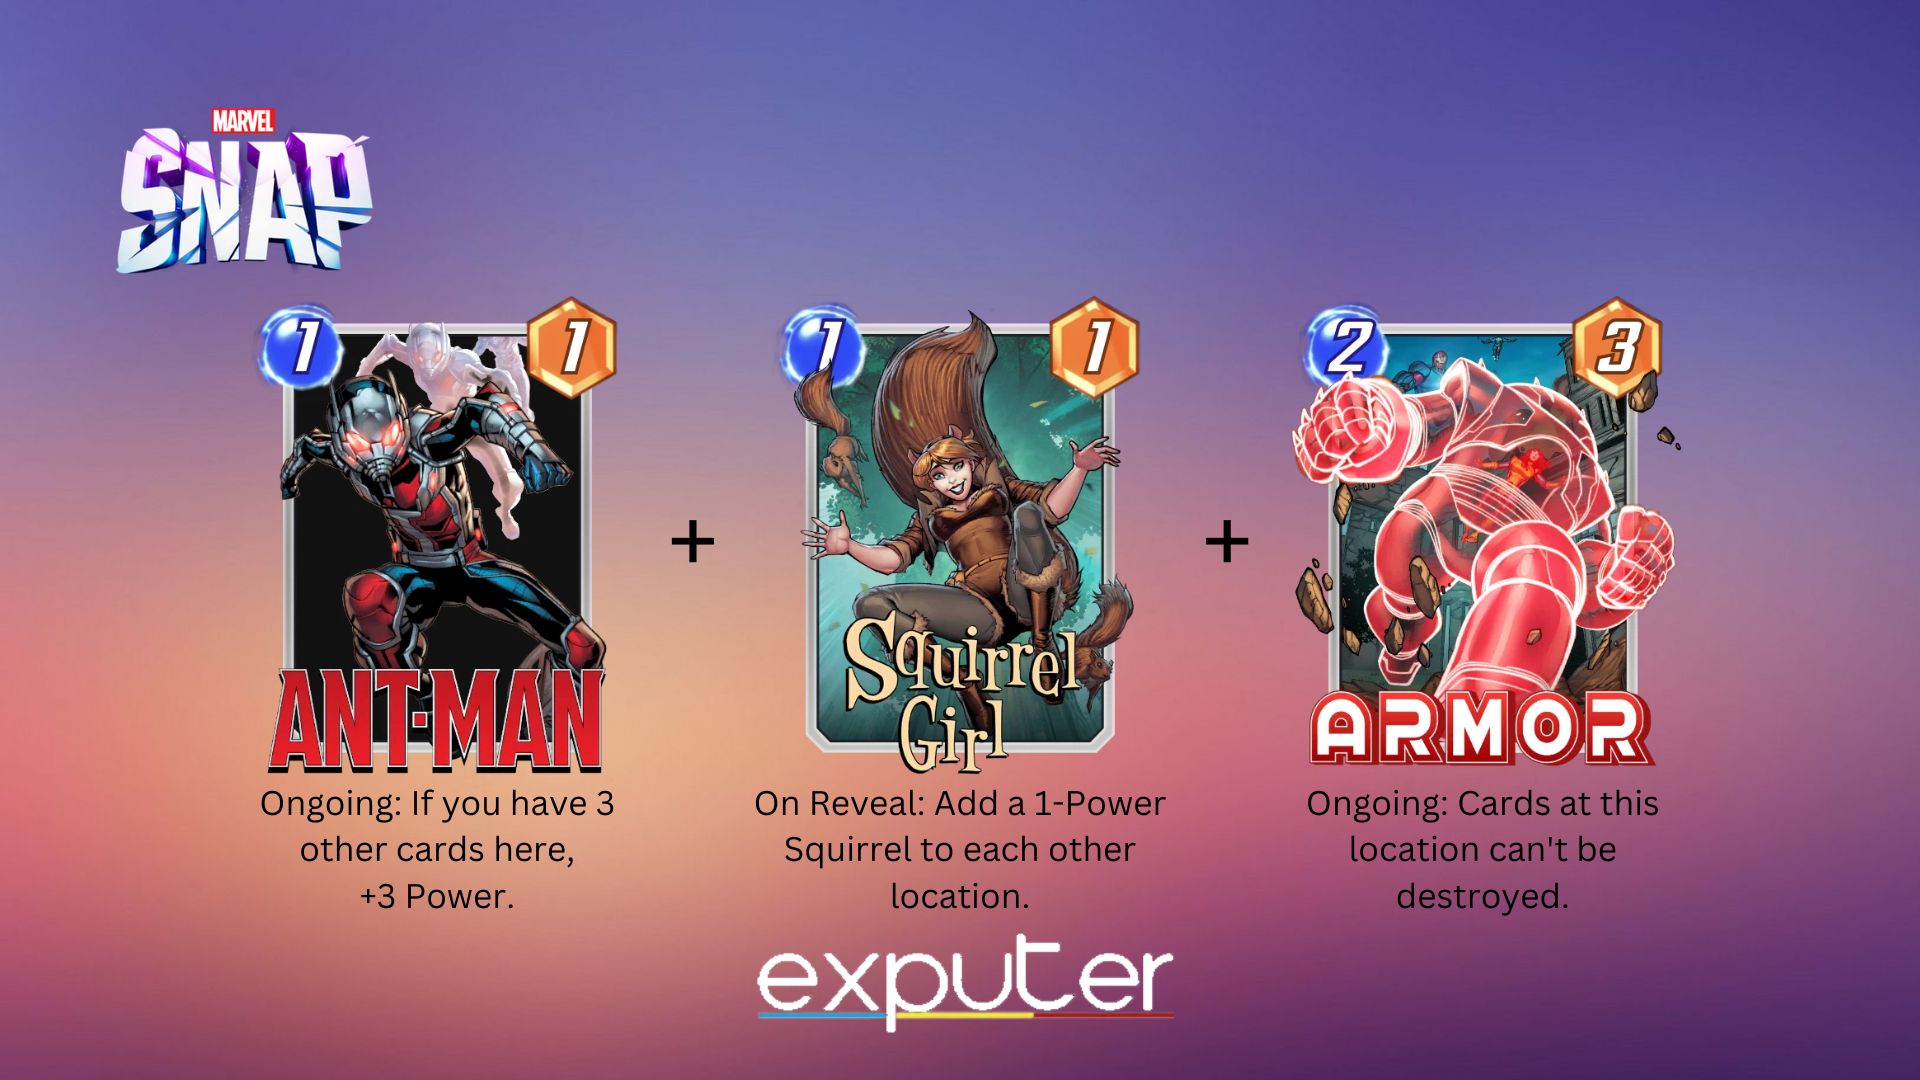 Card Combo with Ant-man in Marvel Snap.